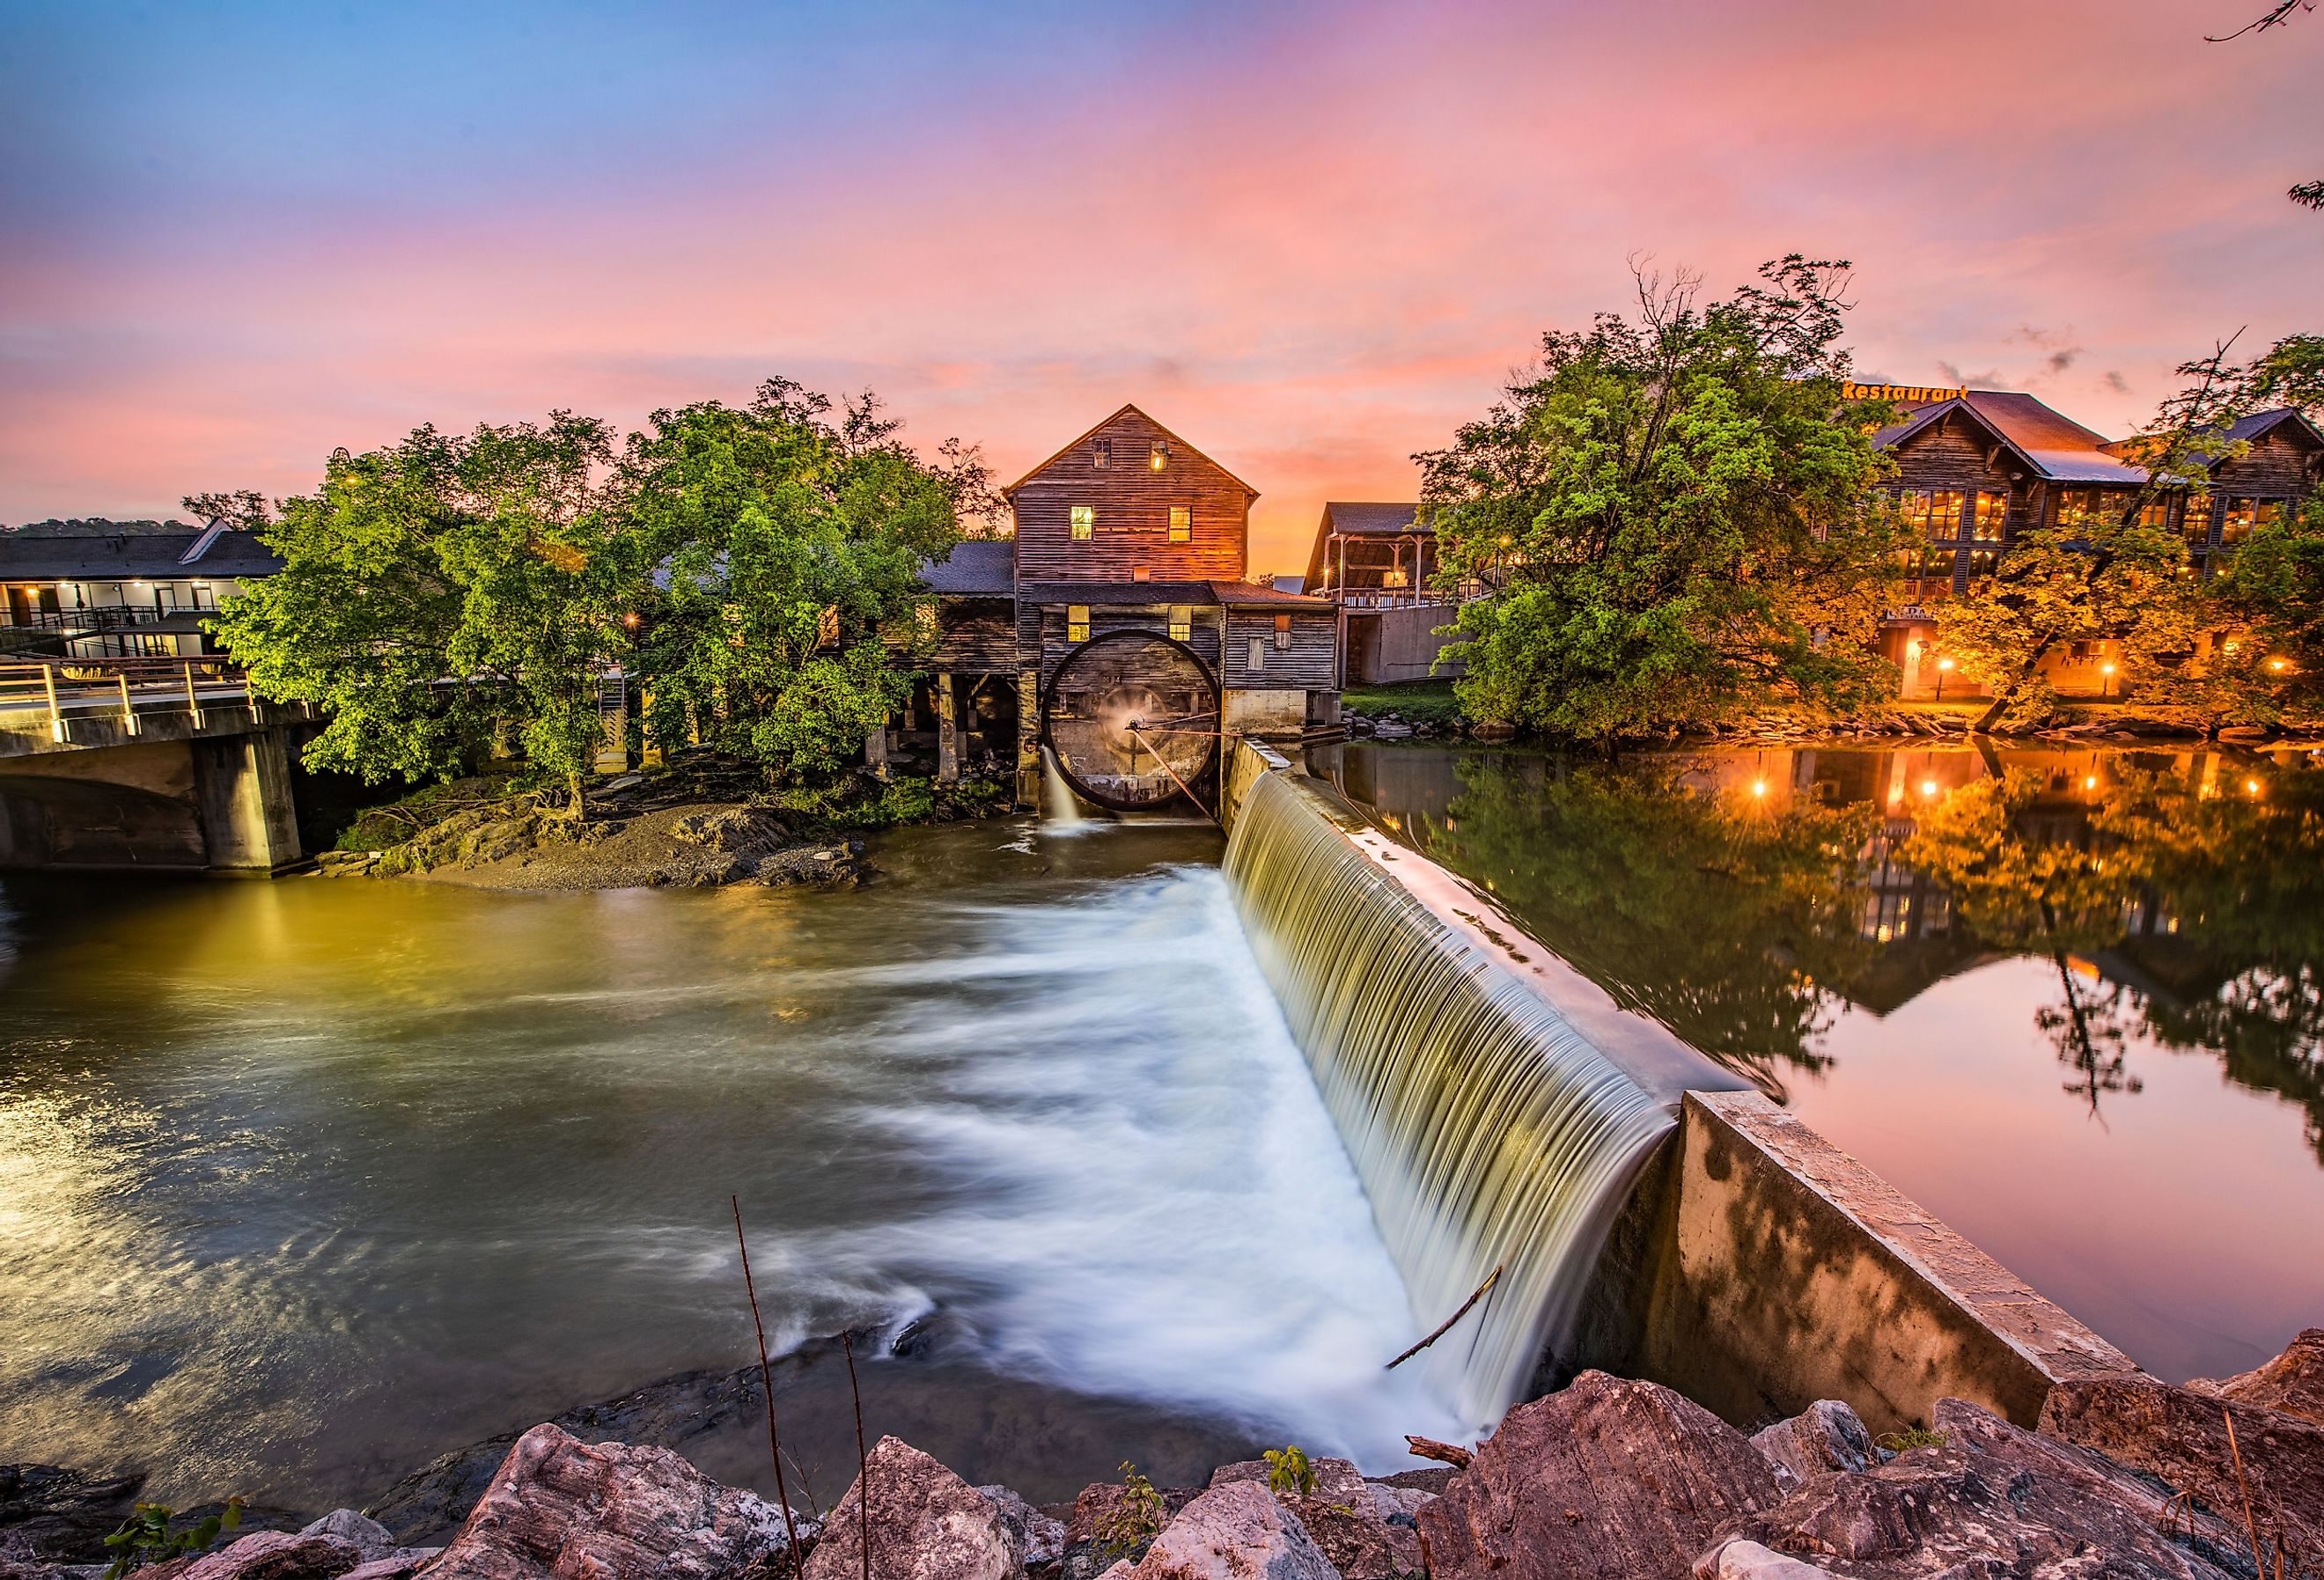 River rushing by the Old Mill in Pigeon Forge.